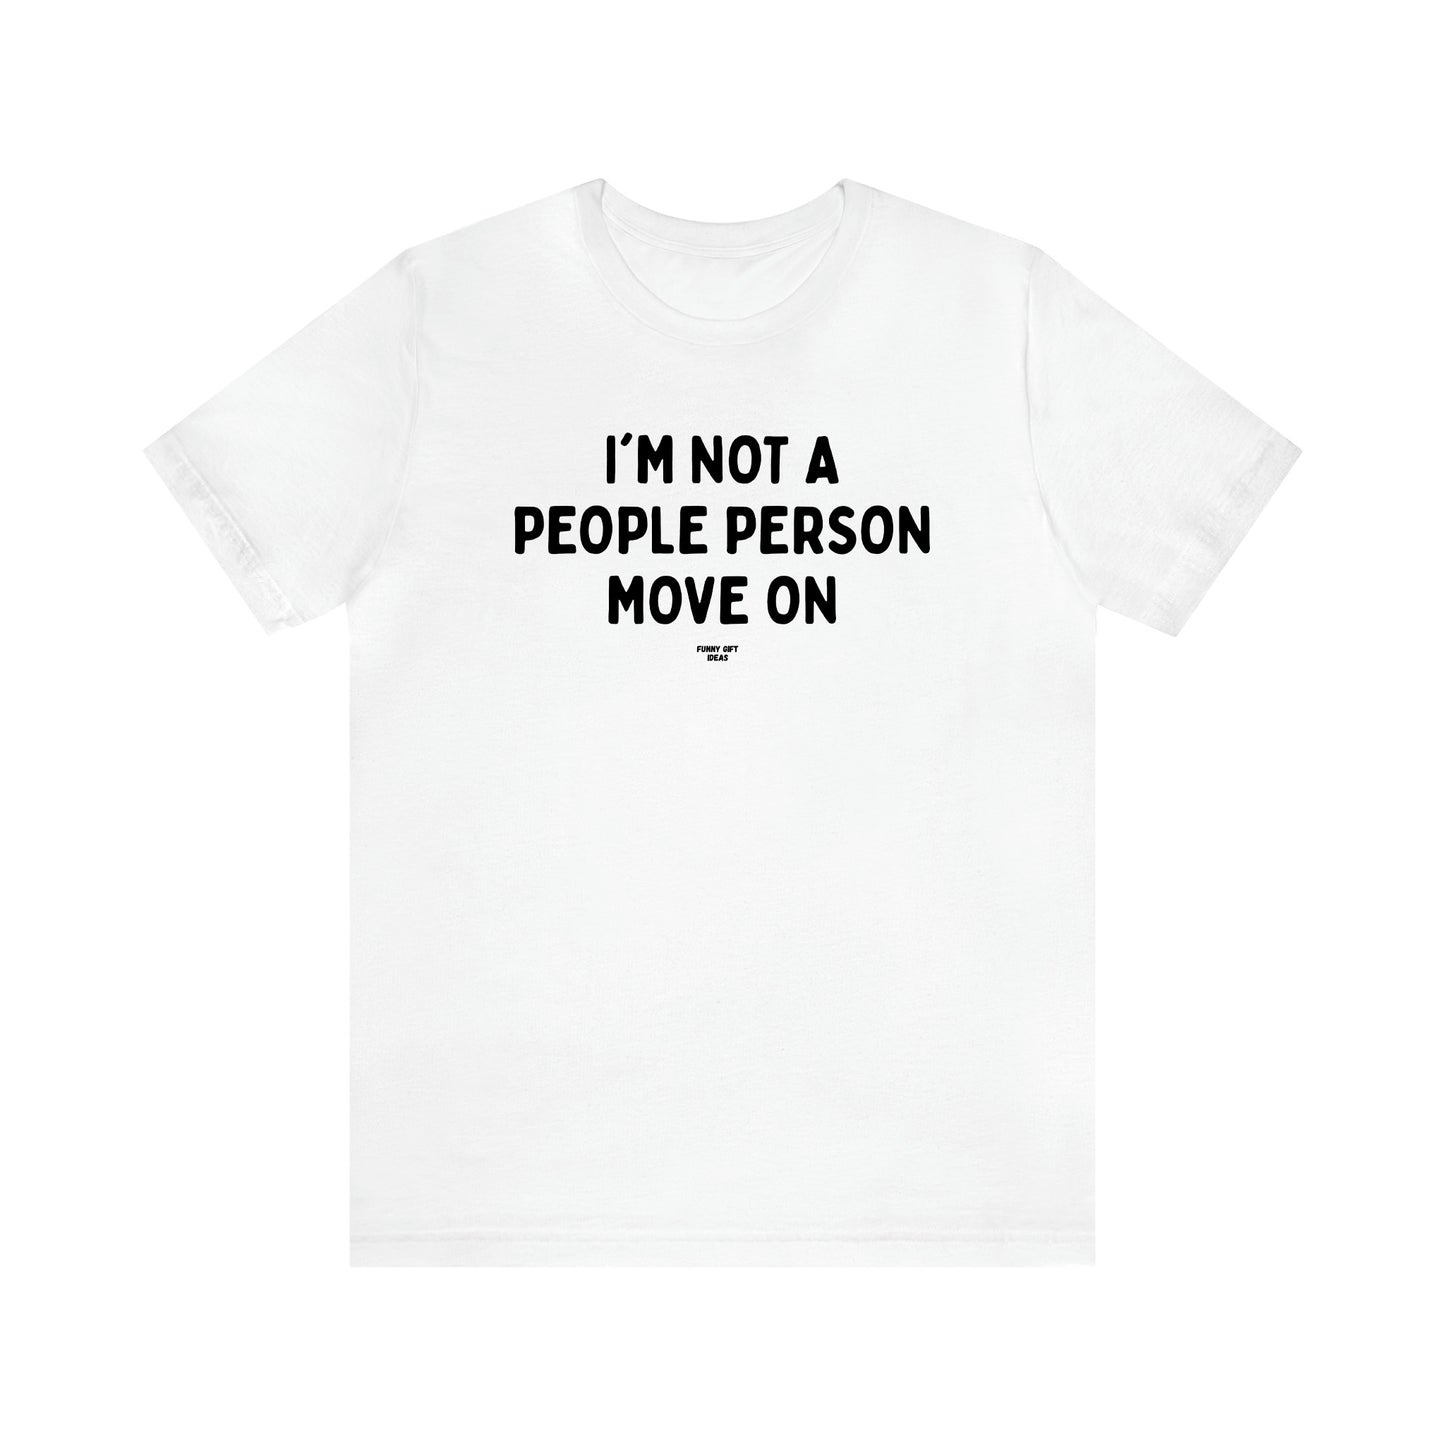 Men's T Shirts I'm Not a People Person Move on - Funny Gift Ideas